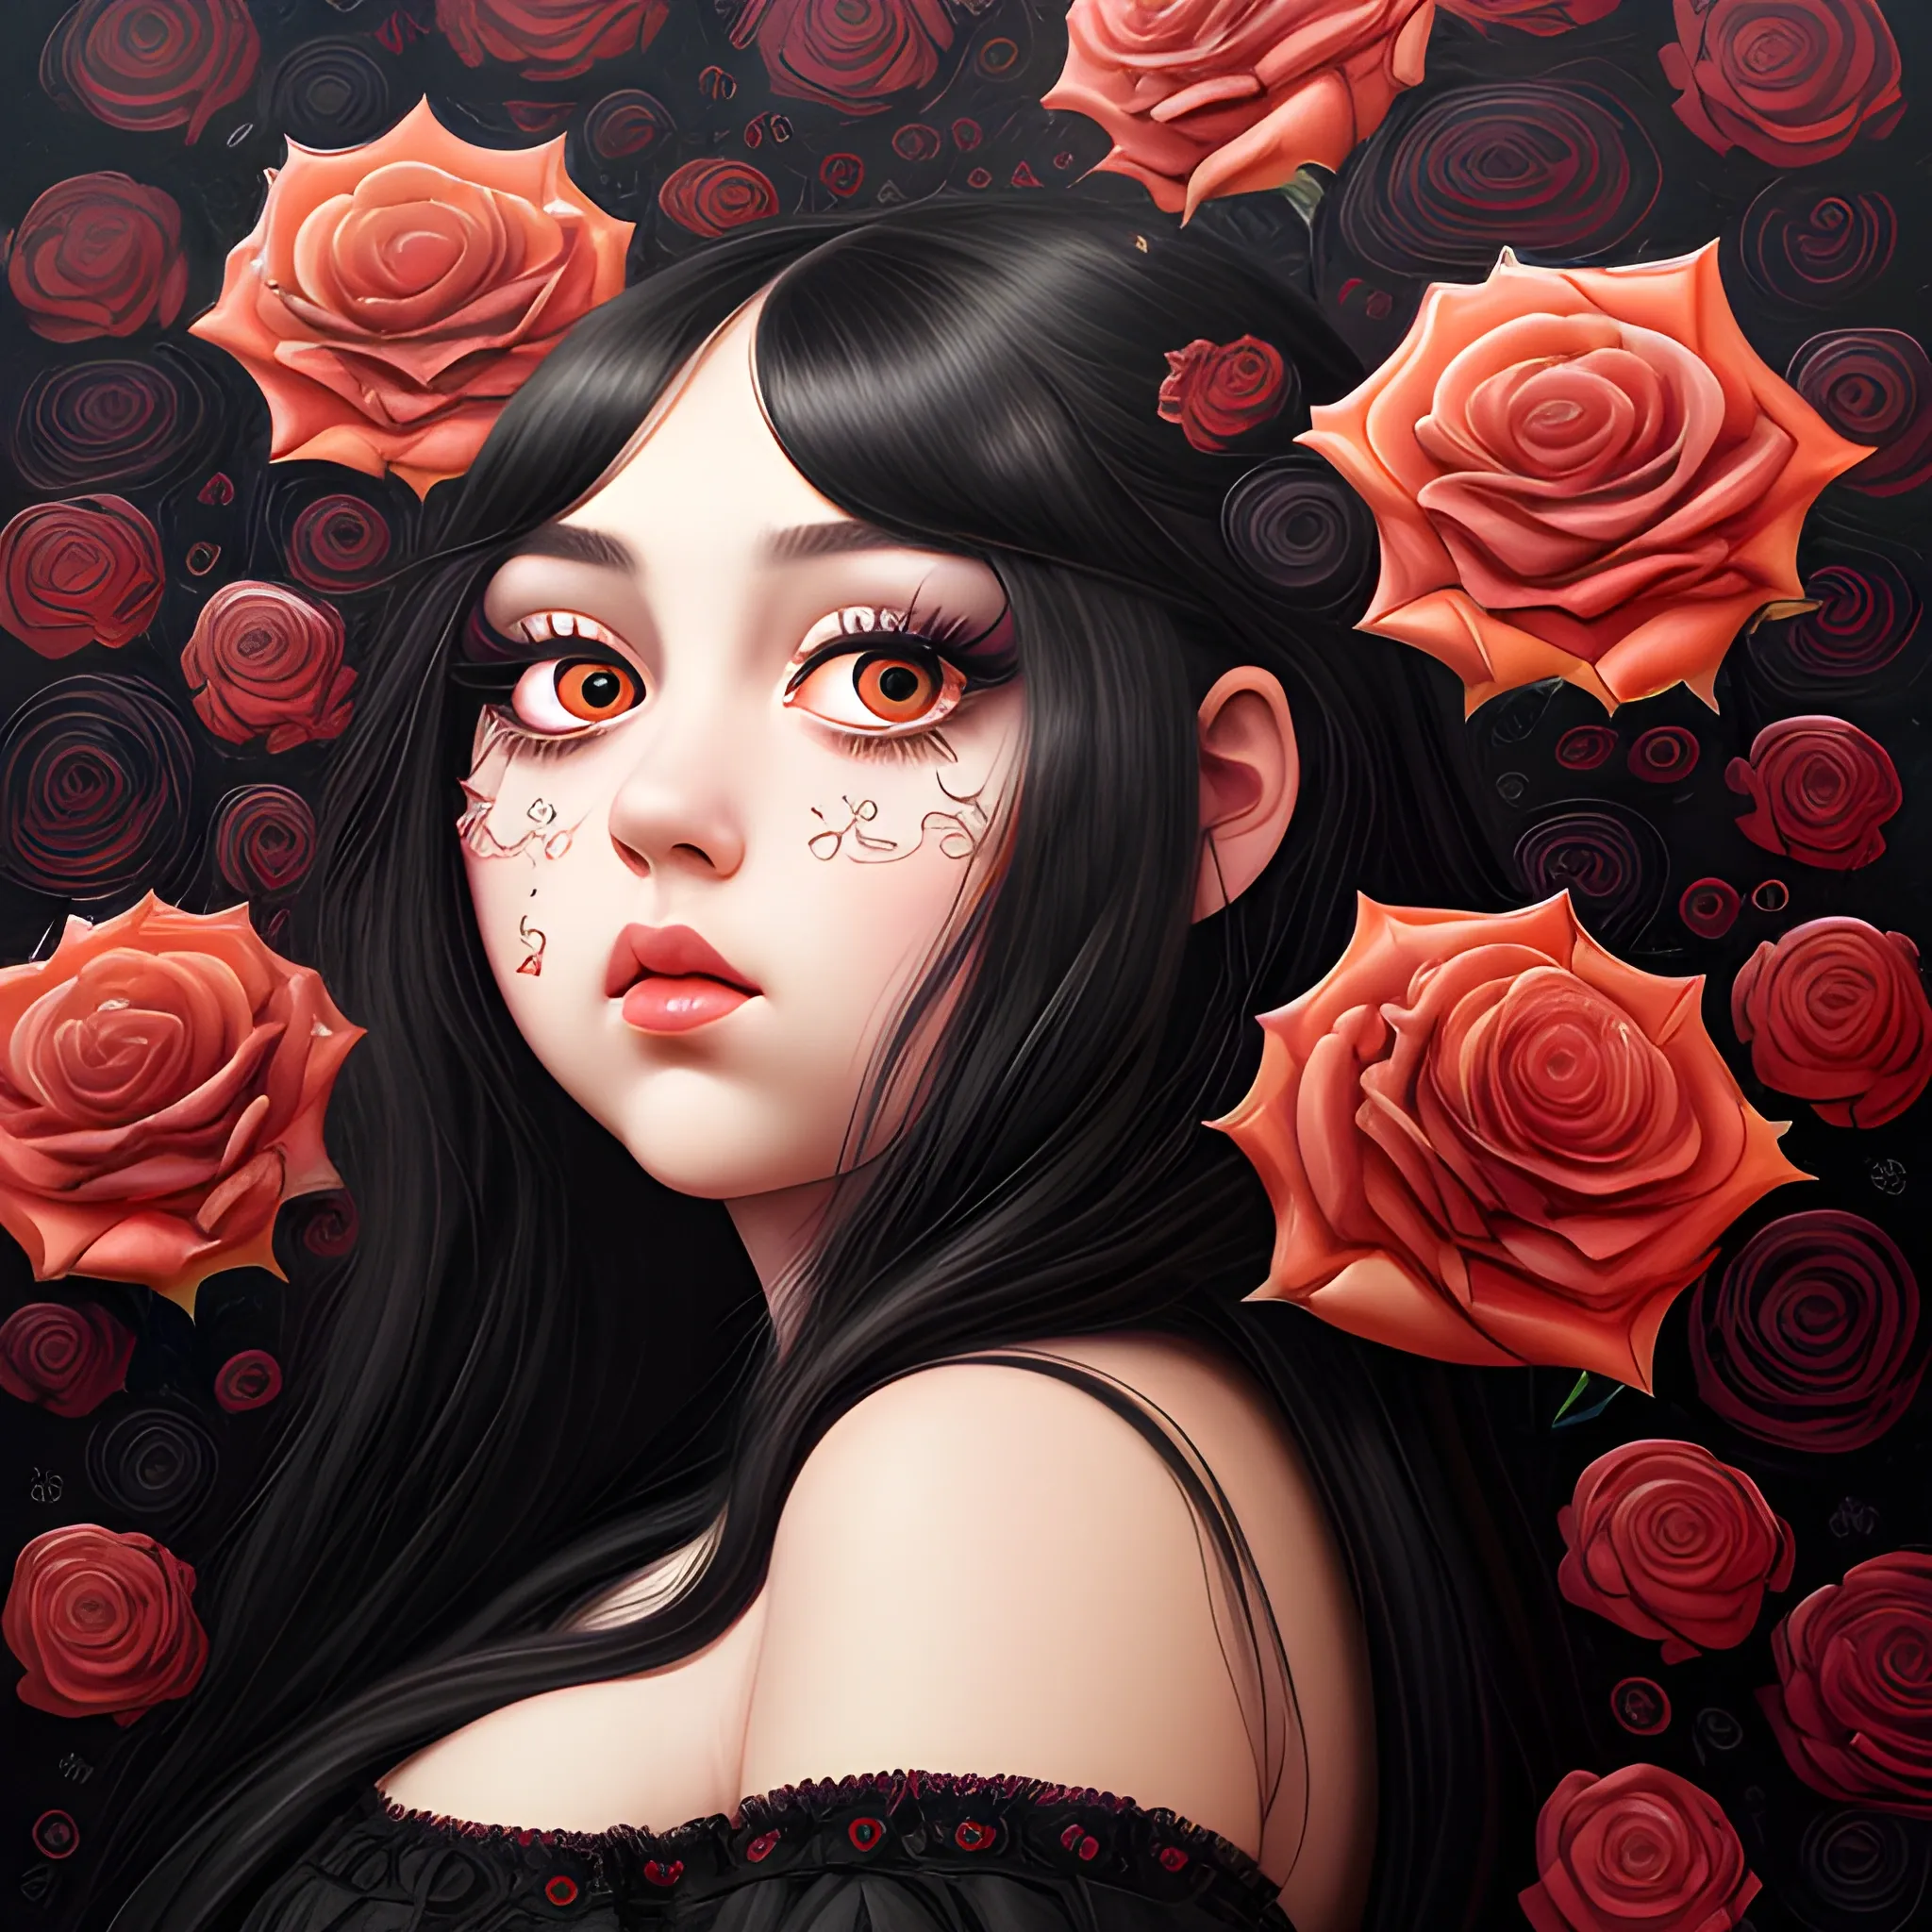 (((high detail))), best quality, Warm Colors, (detailed), (high resolution)Black long-haired female, curvy face, with rosy cheeks, big black eyes, thick eyelashes, thick peach lips, thick eyebrows,  with a black and red dress, roses of backround Trippy, Oil Painting, wallper , Trippy